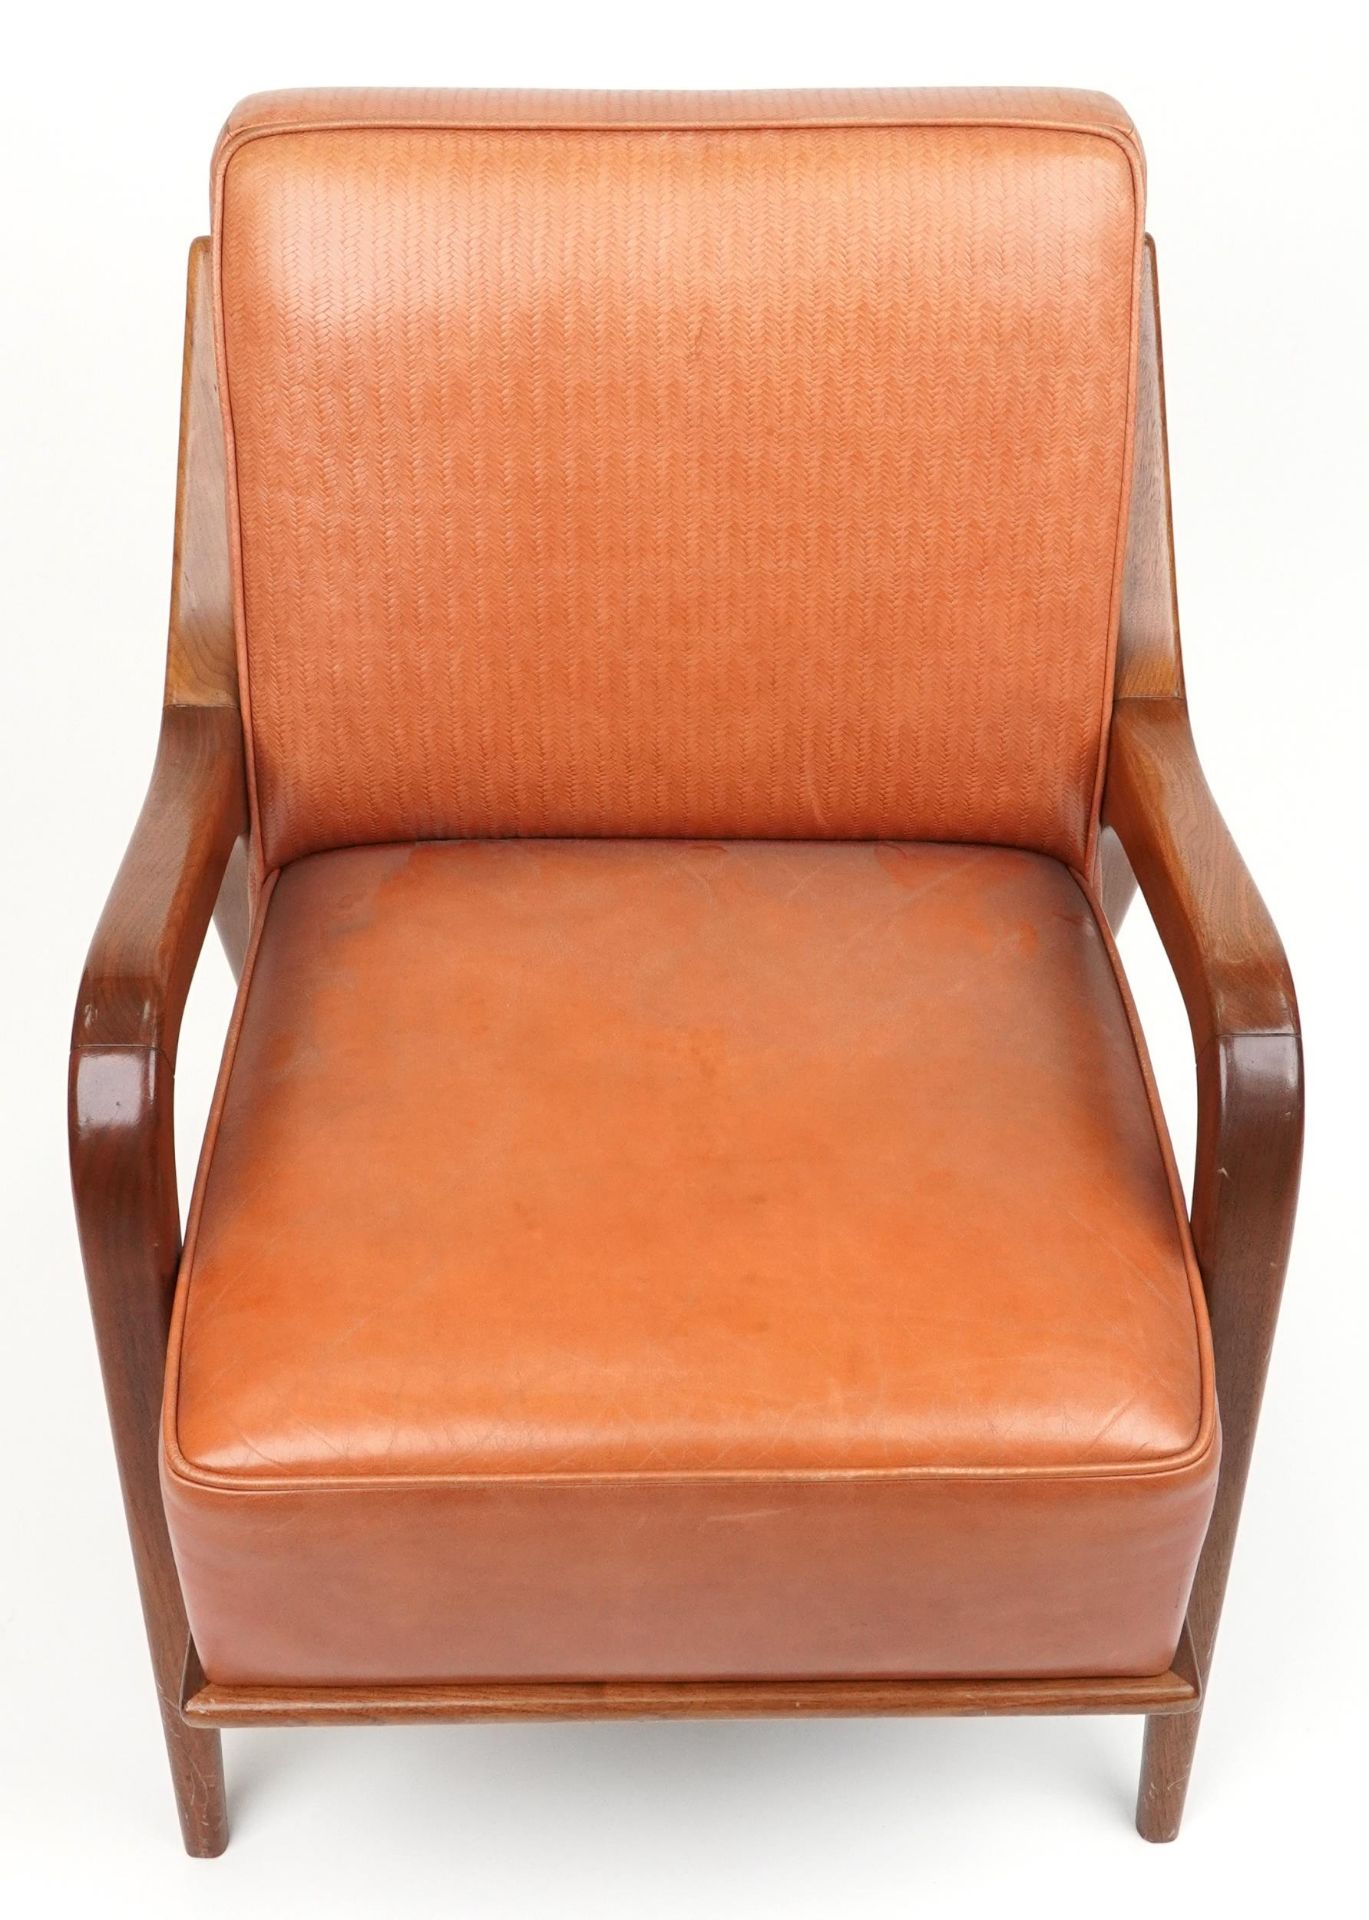 Scandinavian design hardwood lounge chair having a tan upholstered back and seat, 86cm H x 62.5cm - Image 3 of 4